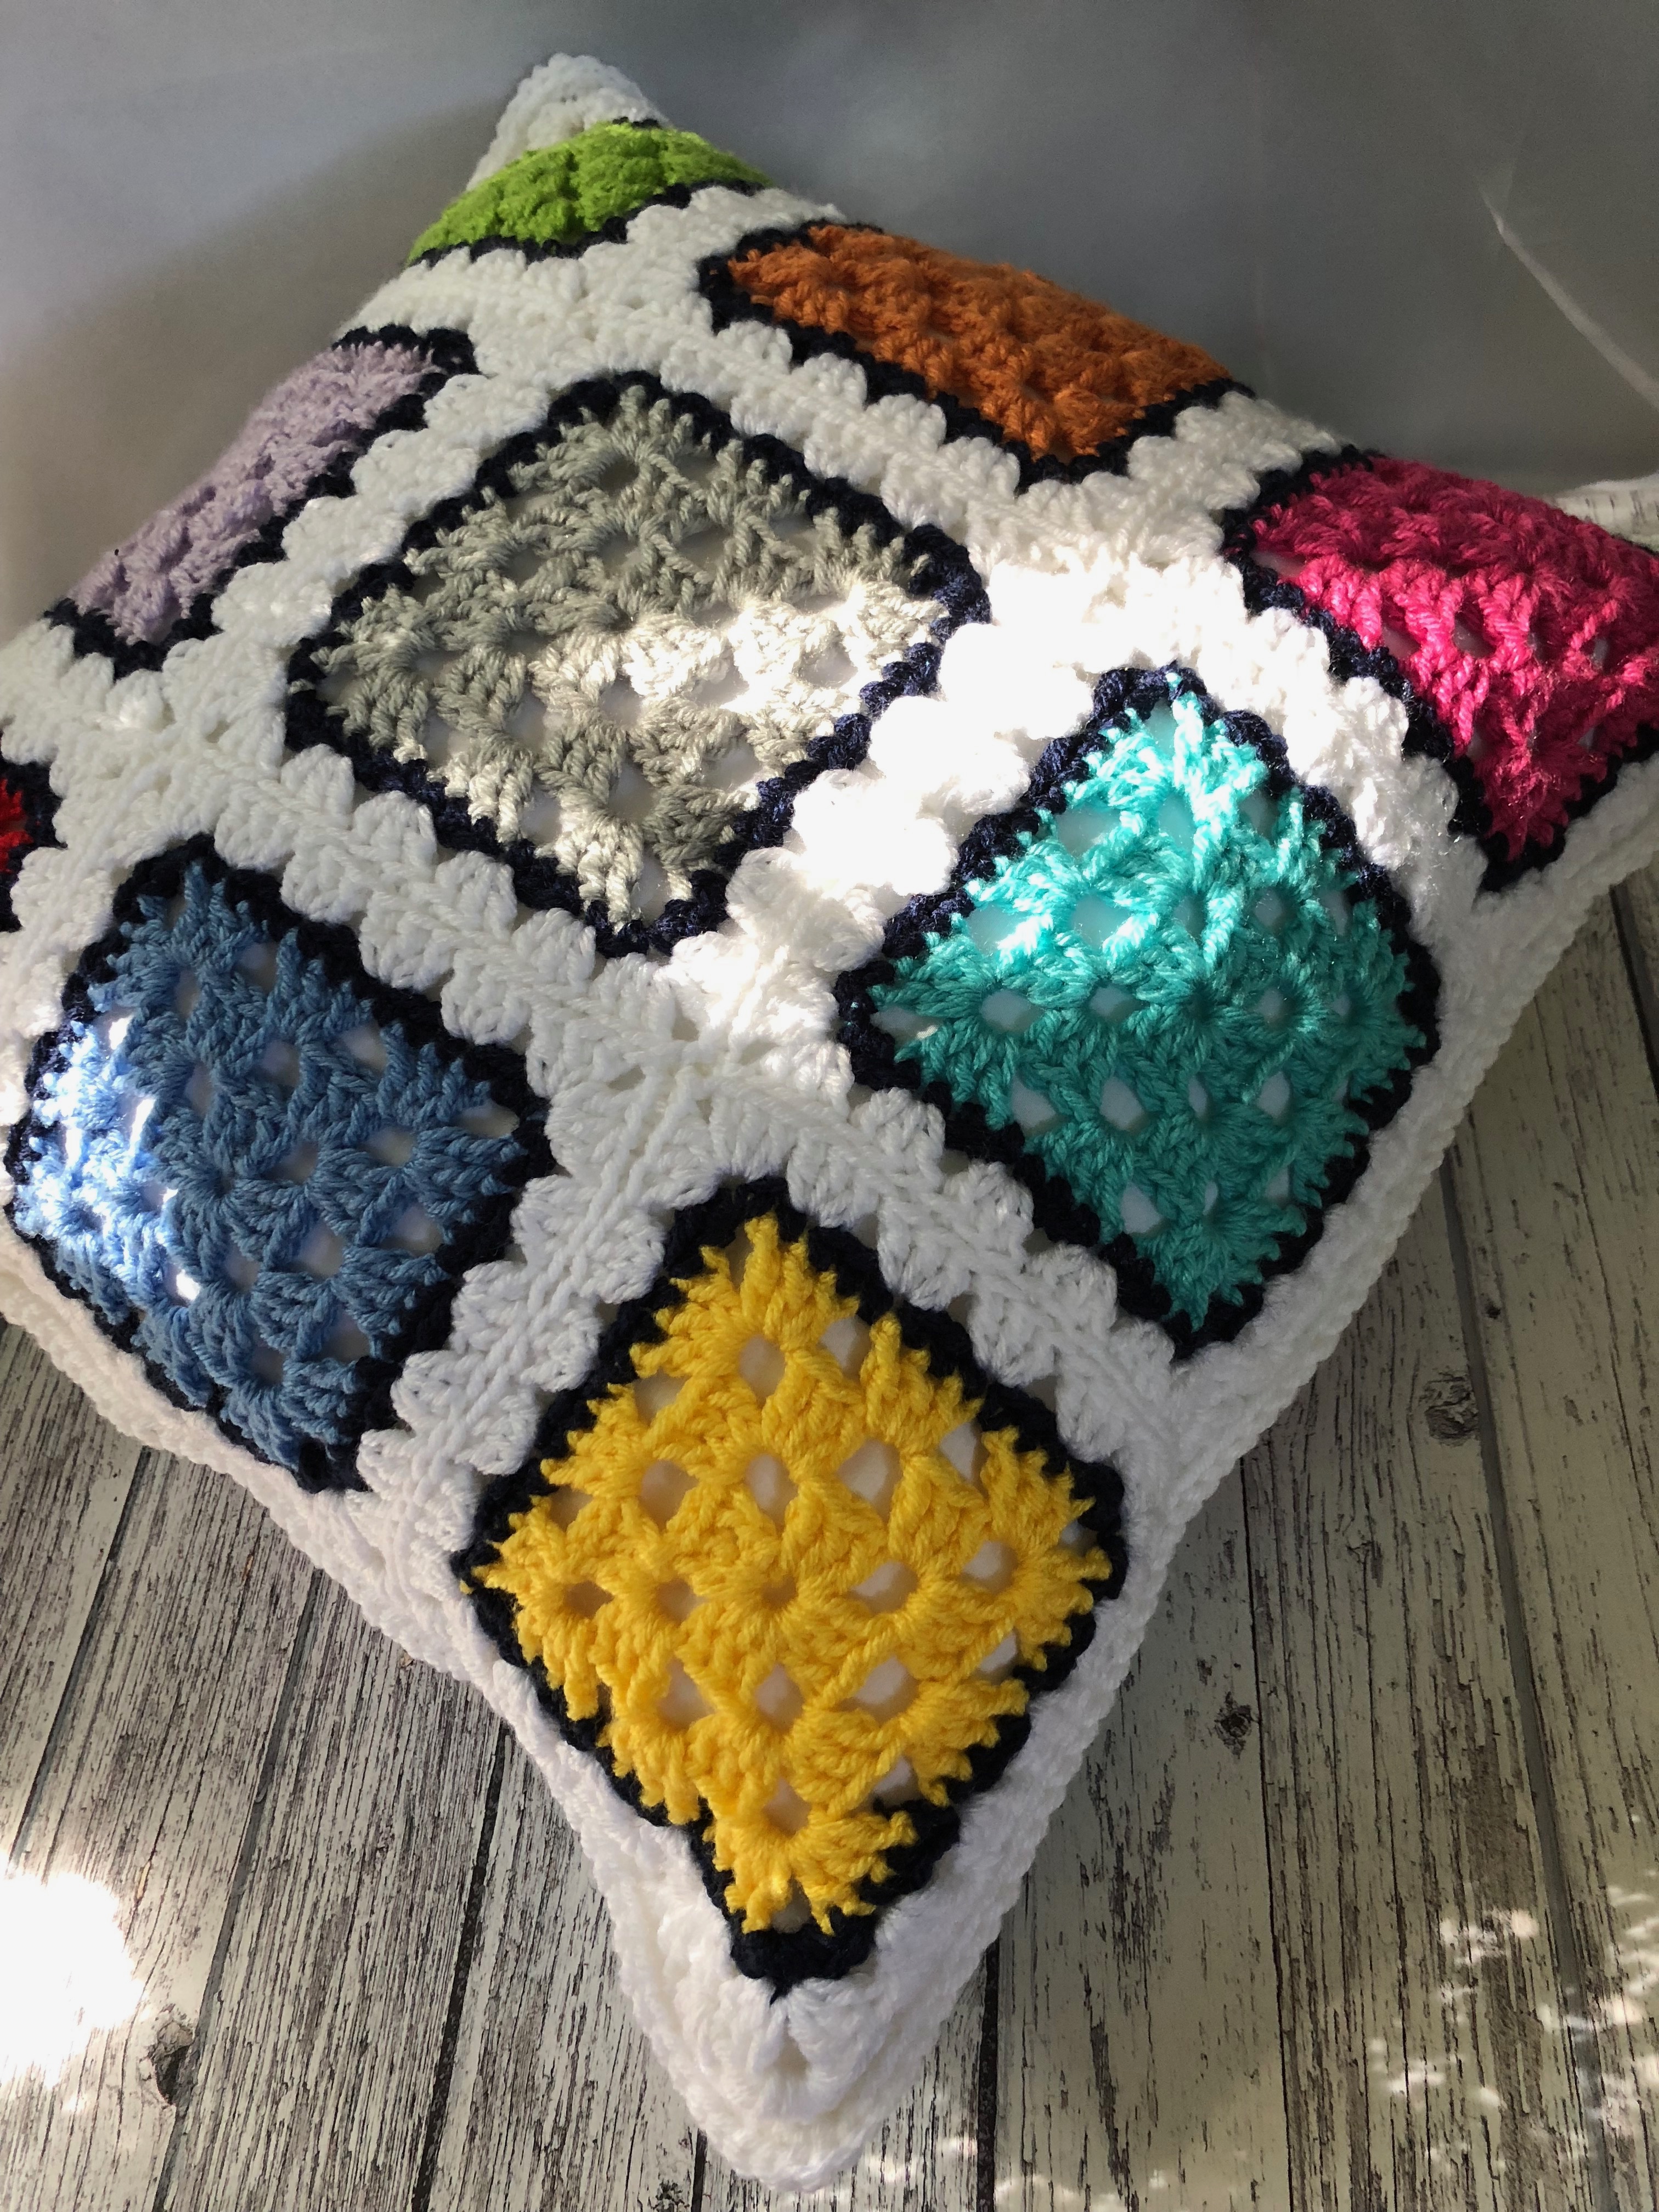 Fun granny square pillow crochet pattern for your home